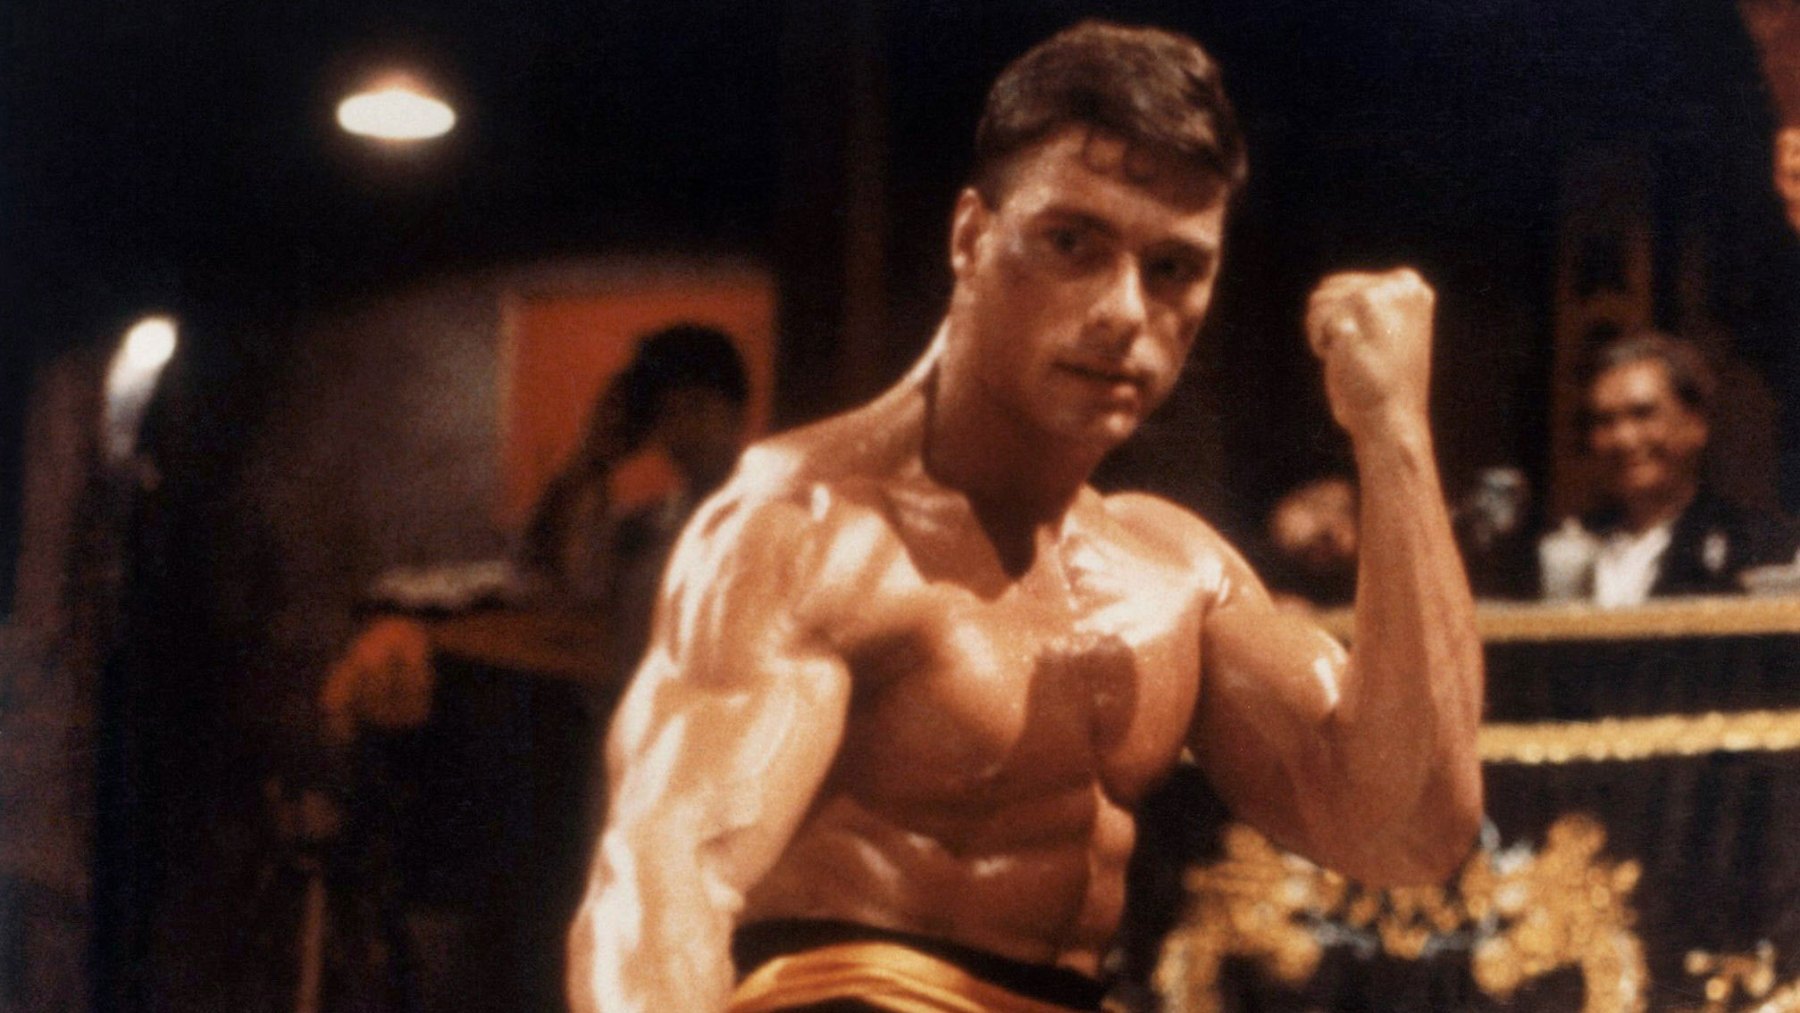 The 10 Best Fitness Movies on Netflix | Muscle & Fitness